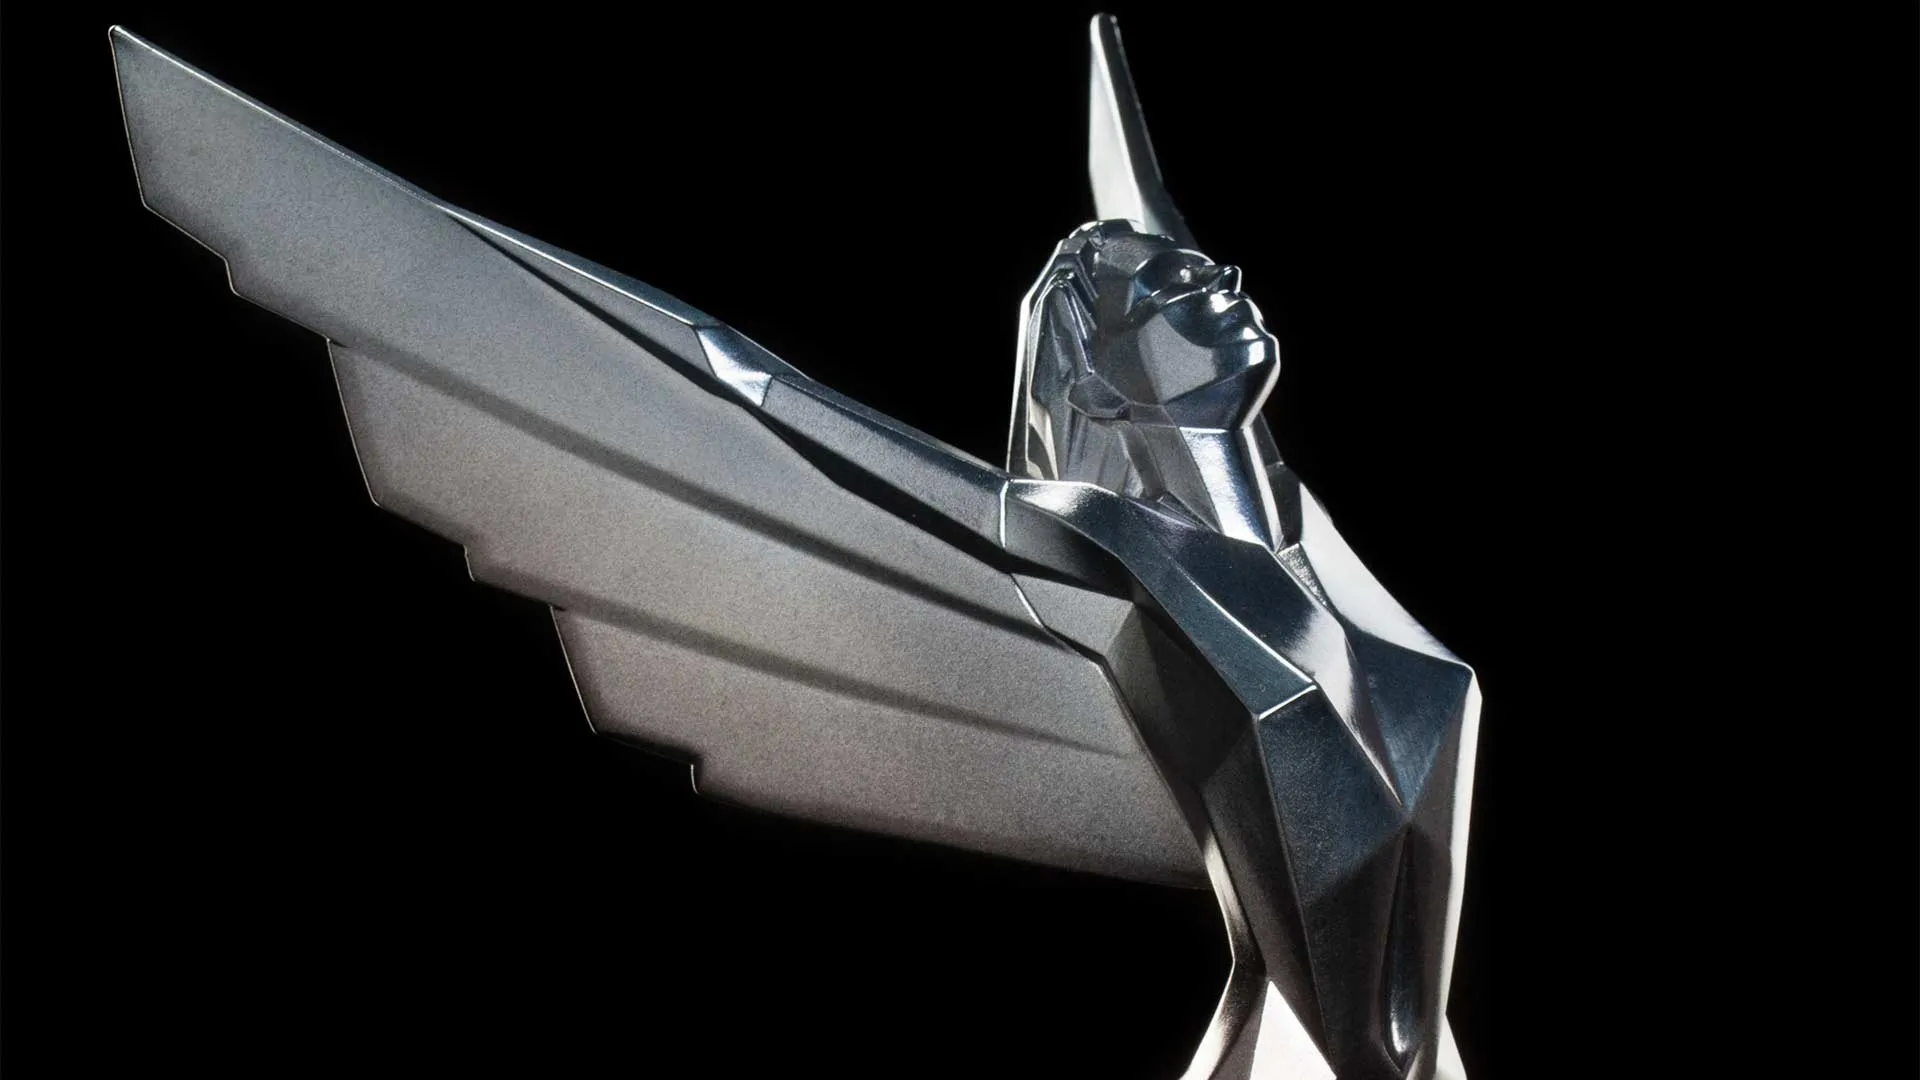 The Game Awards 2017 will take place December 7